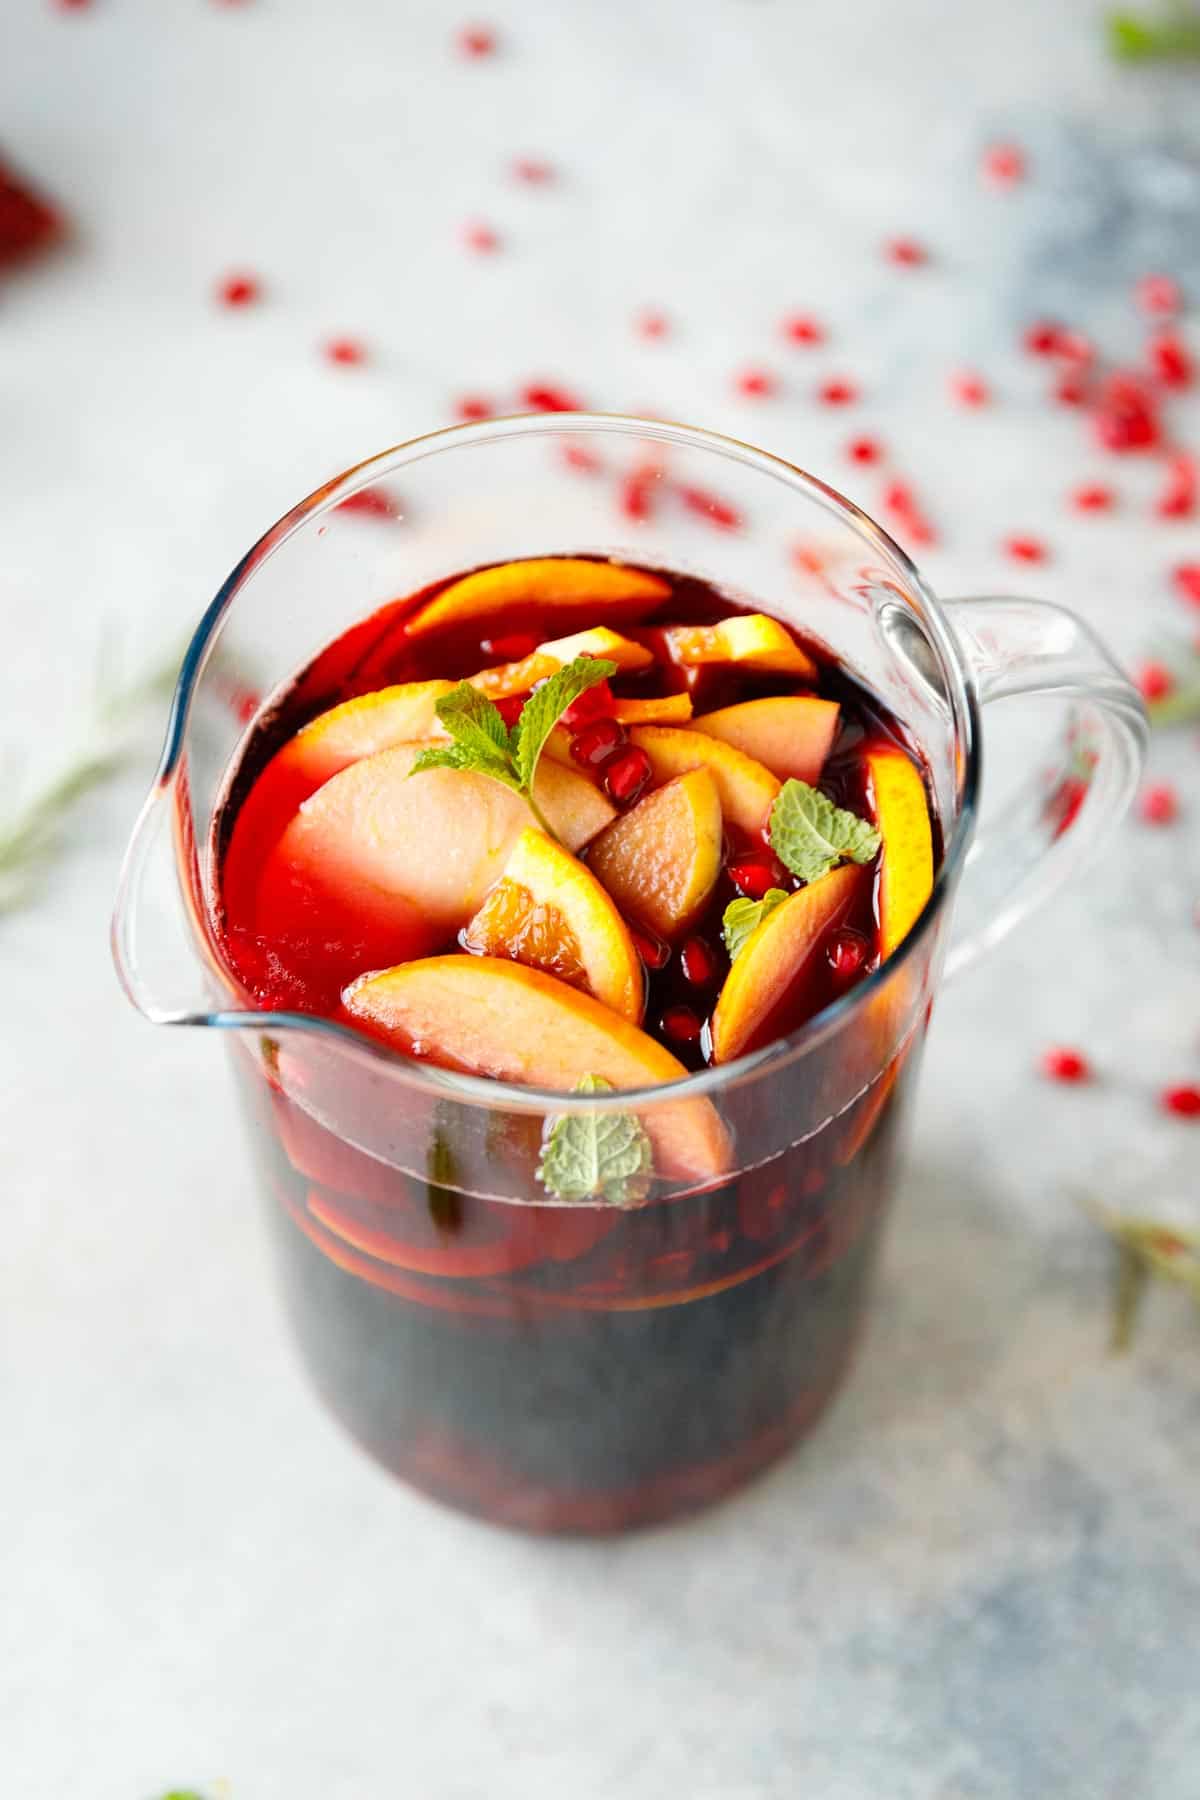 Best Sangria: Fruity Wine and Brandy Cocktail Pitcher For Sharing